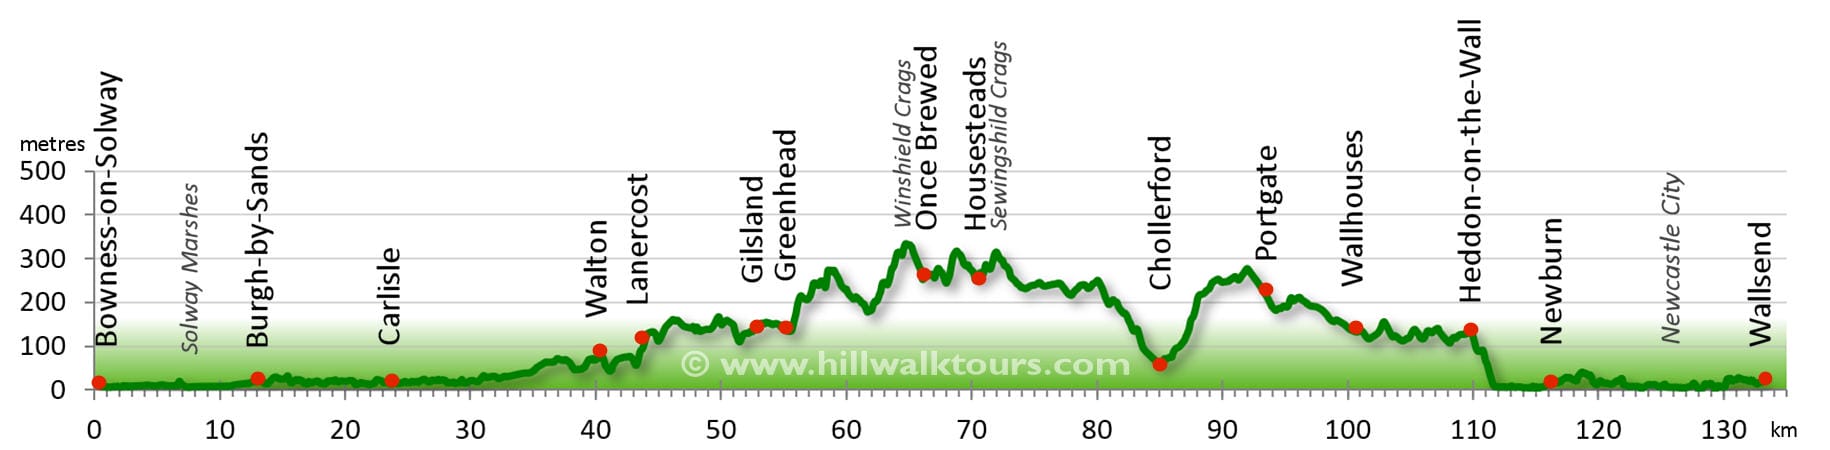 Hadrian's Wall Path West to East Elevation Profile